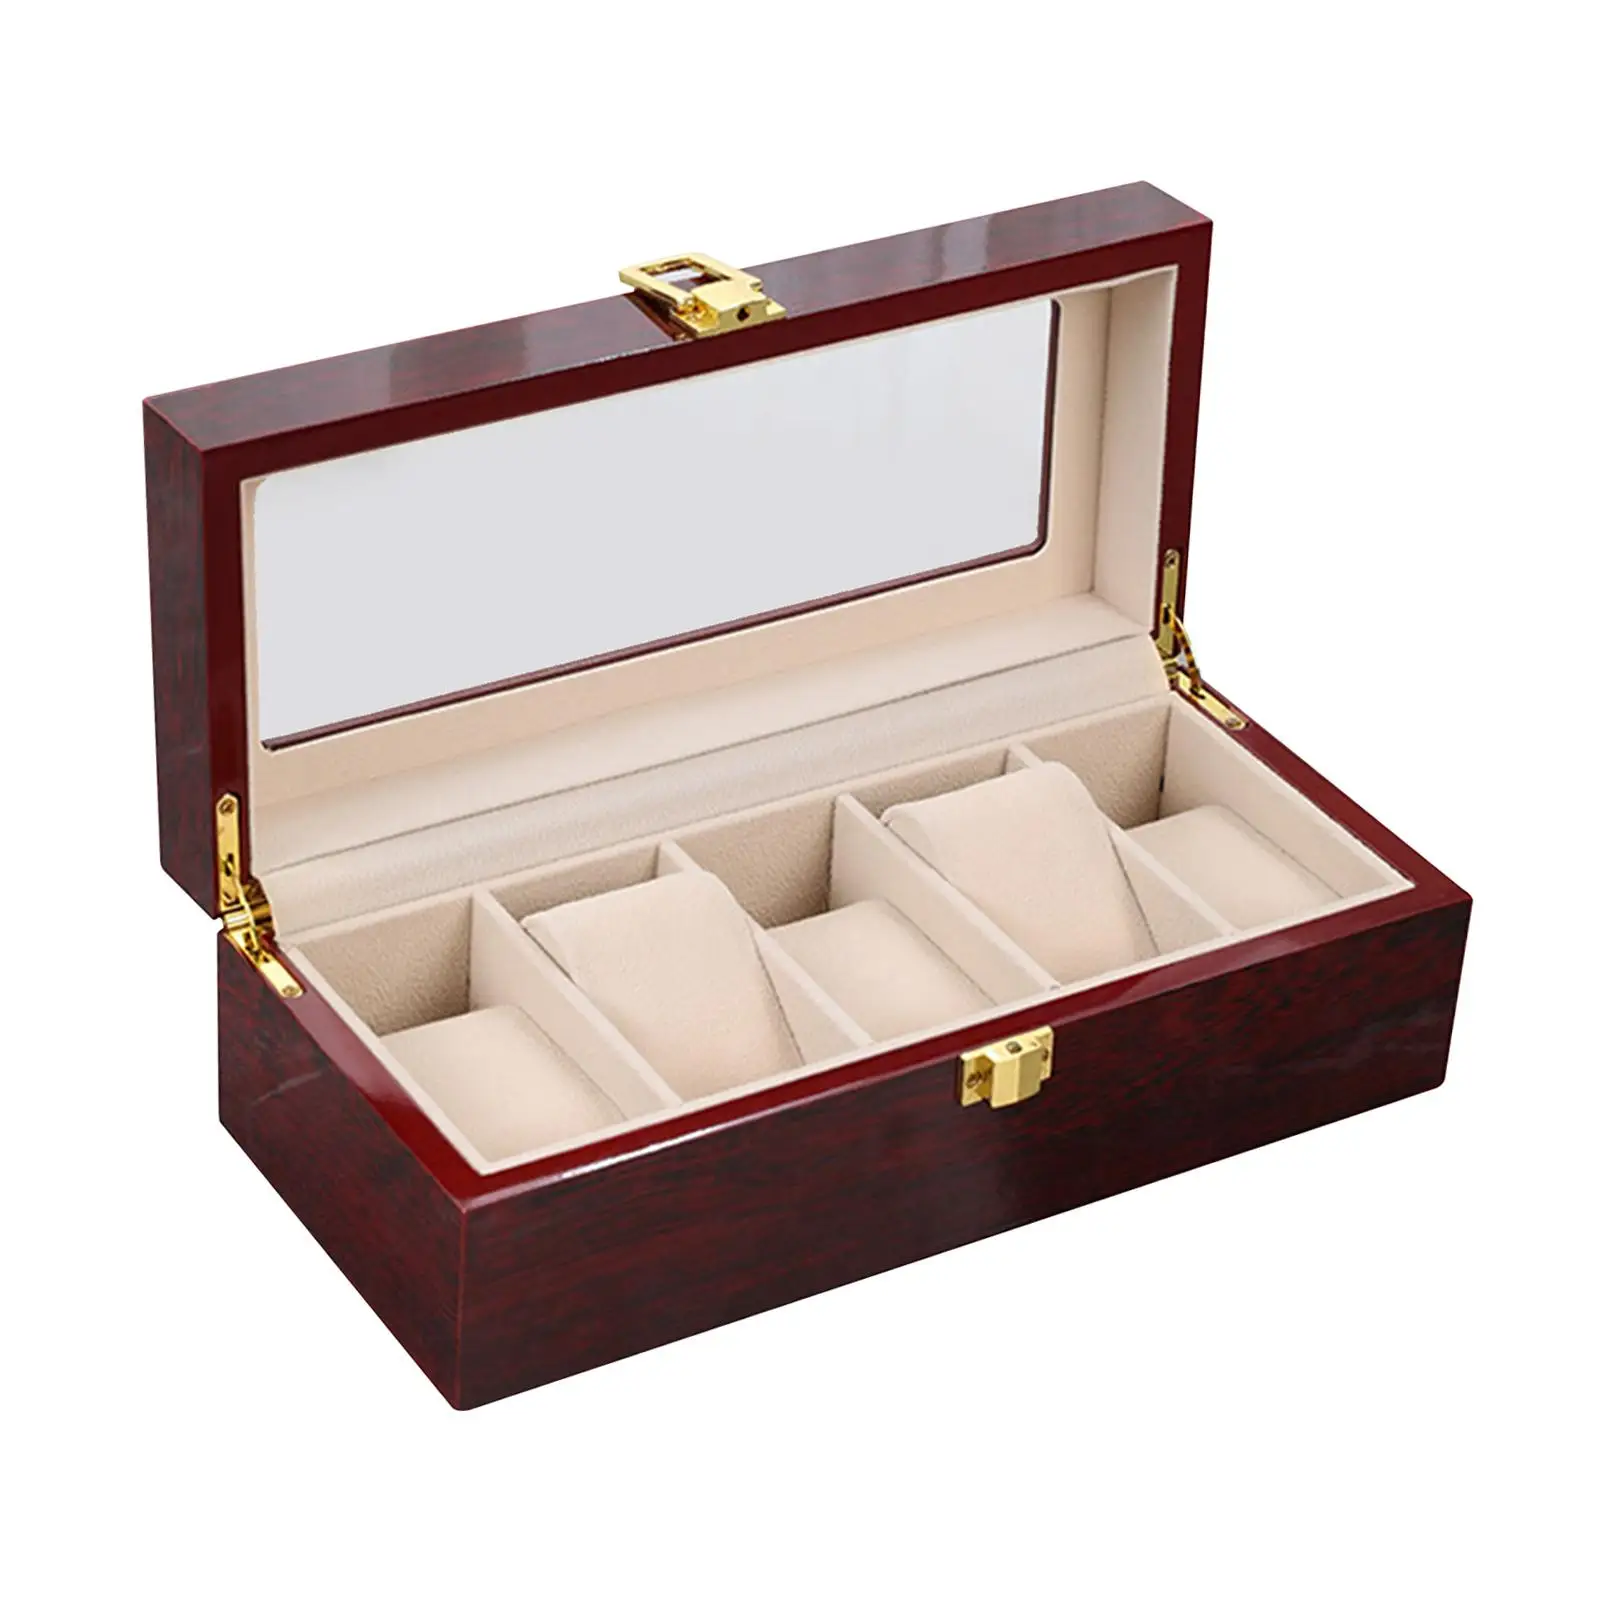 Watch Box Organizer Watch Organizer Holder for Table Dresser Shop Display Men and Women Watches Necklace Bracelet Earrings